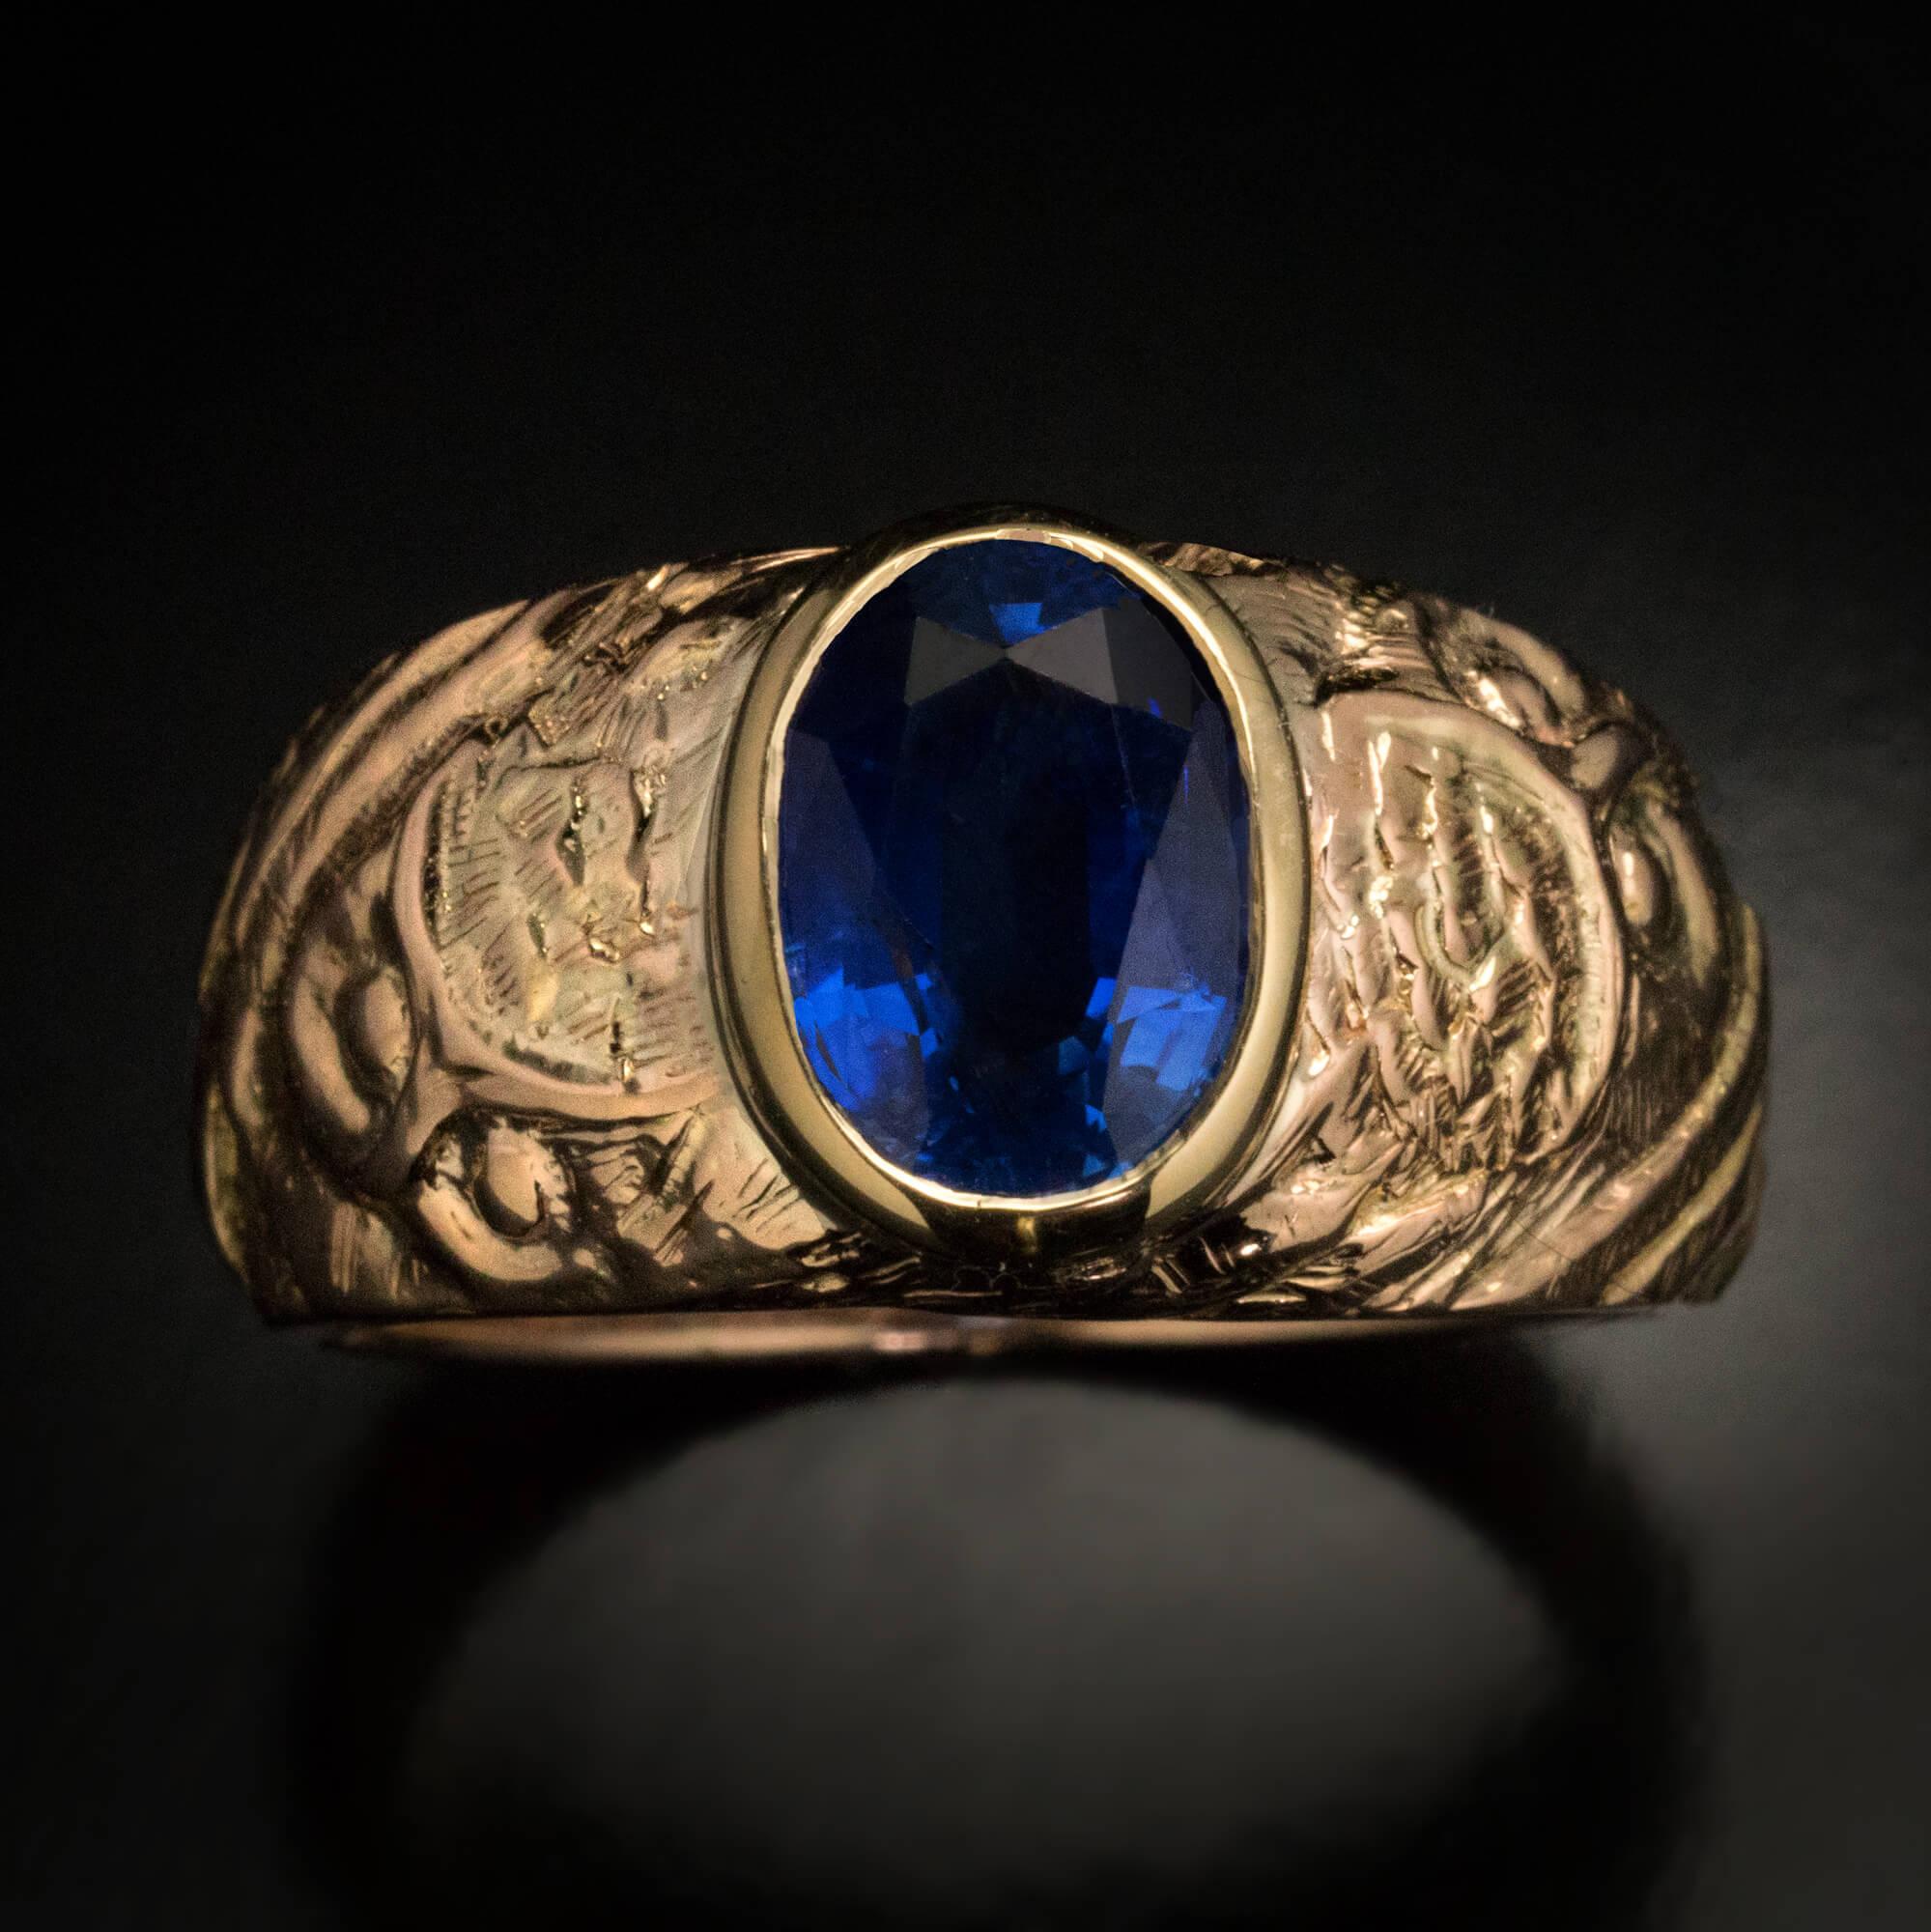 Russia, early 1900s.  This antique one-of-a-kind 14K gold ring is designed in the Russian Modern style of the early 1900s. The ring is bezel set with a fine oval sapphire of a royal blue color. The sapphire is flanked by a pair of stylized owls, a